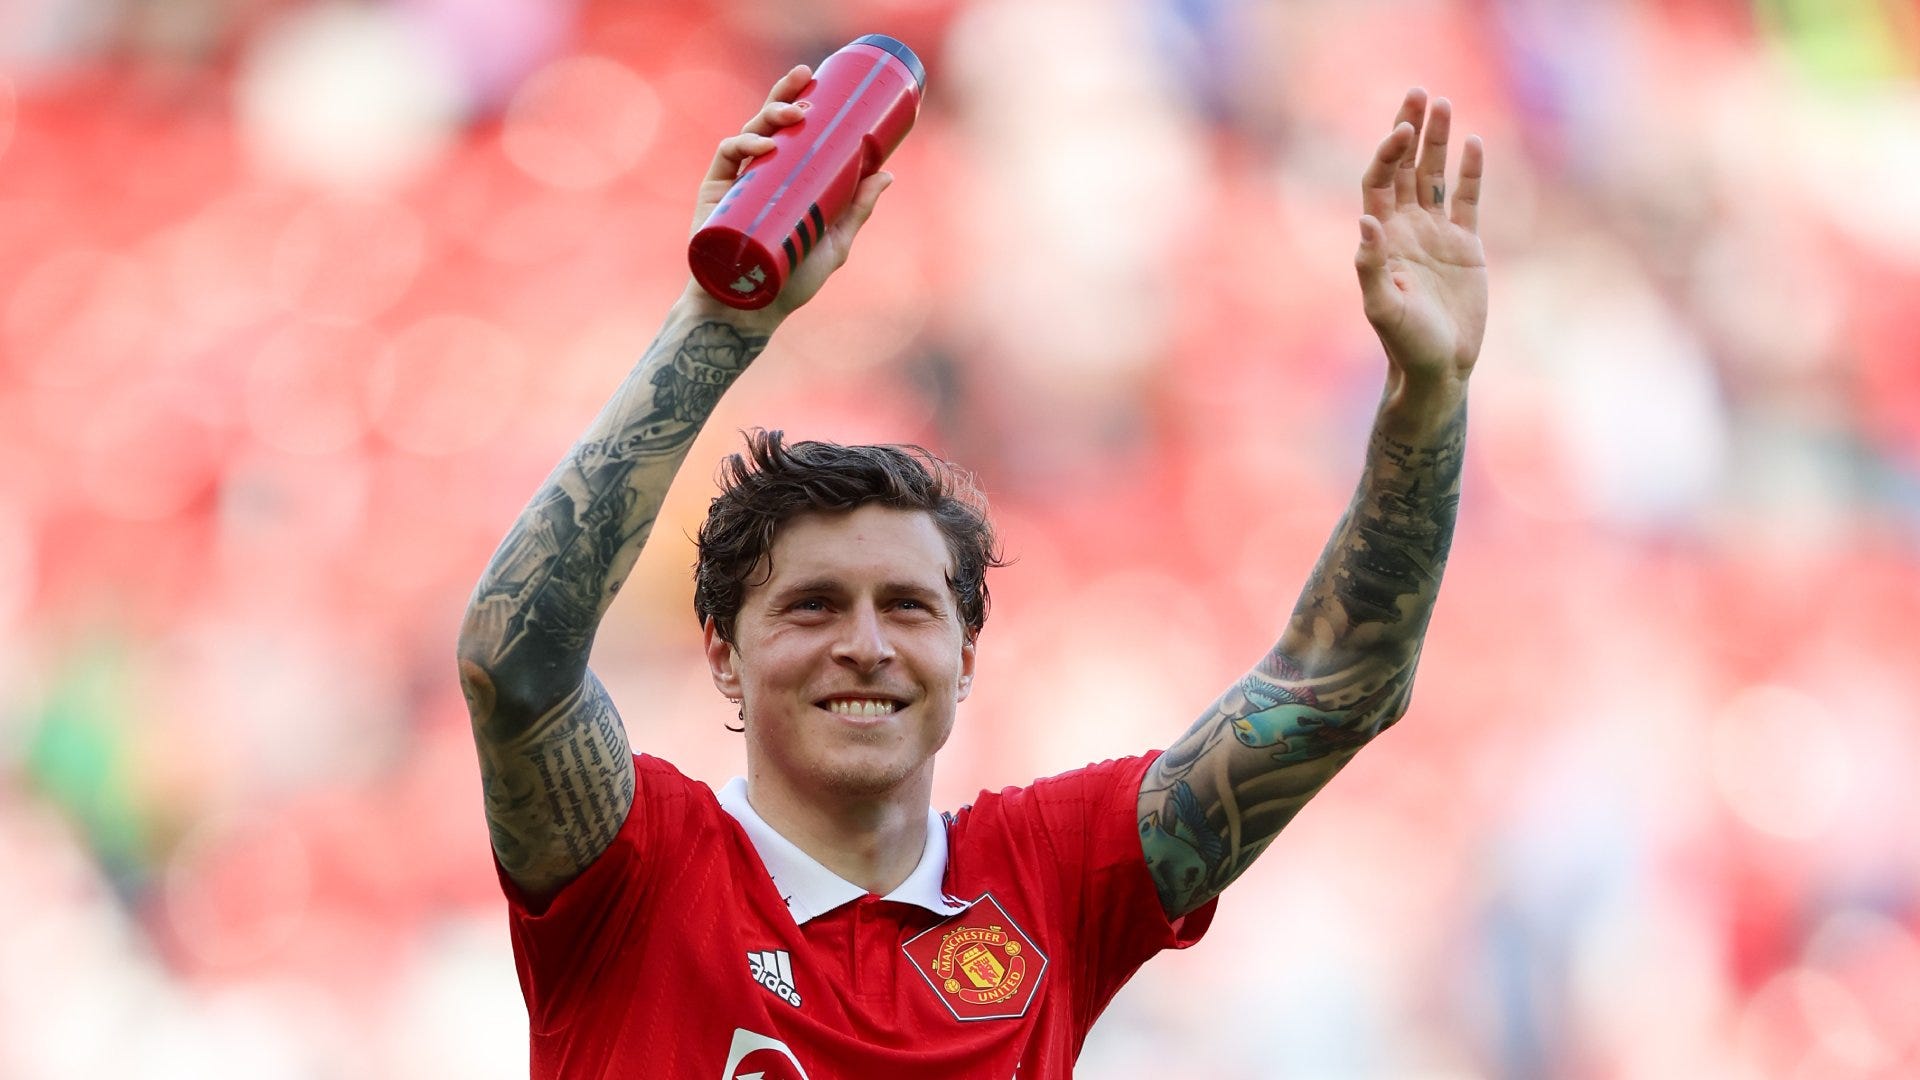 Man Utd consider Victor Lindelof 'untouchable' and will NOT sell defender this summer | Goal.com US